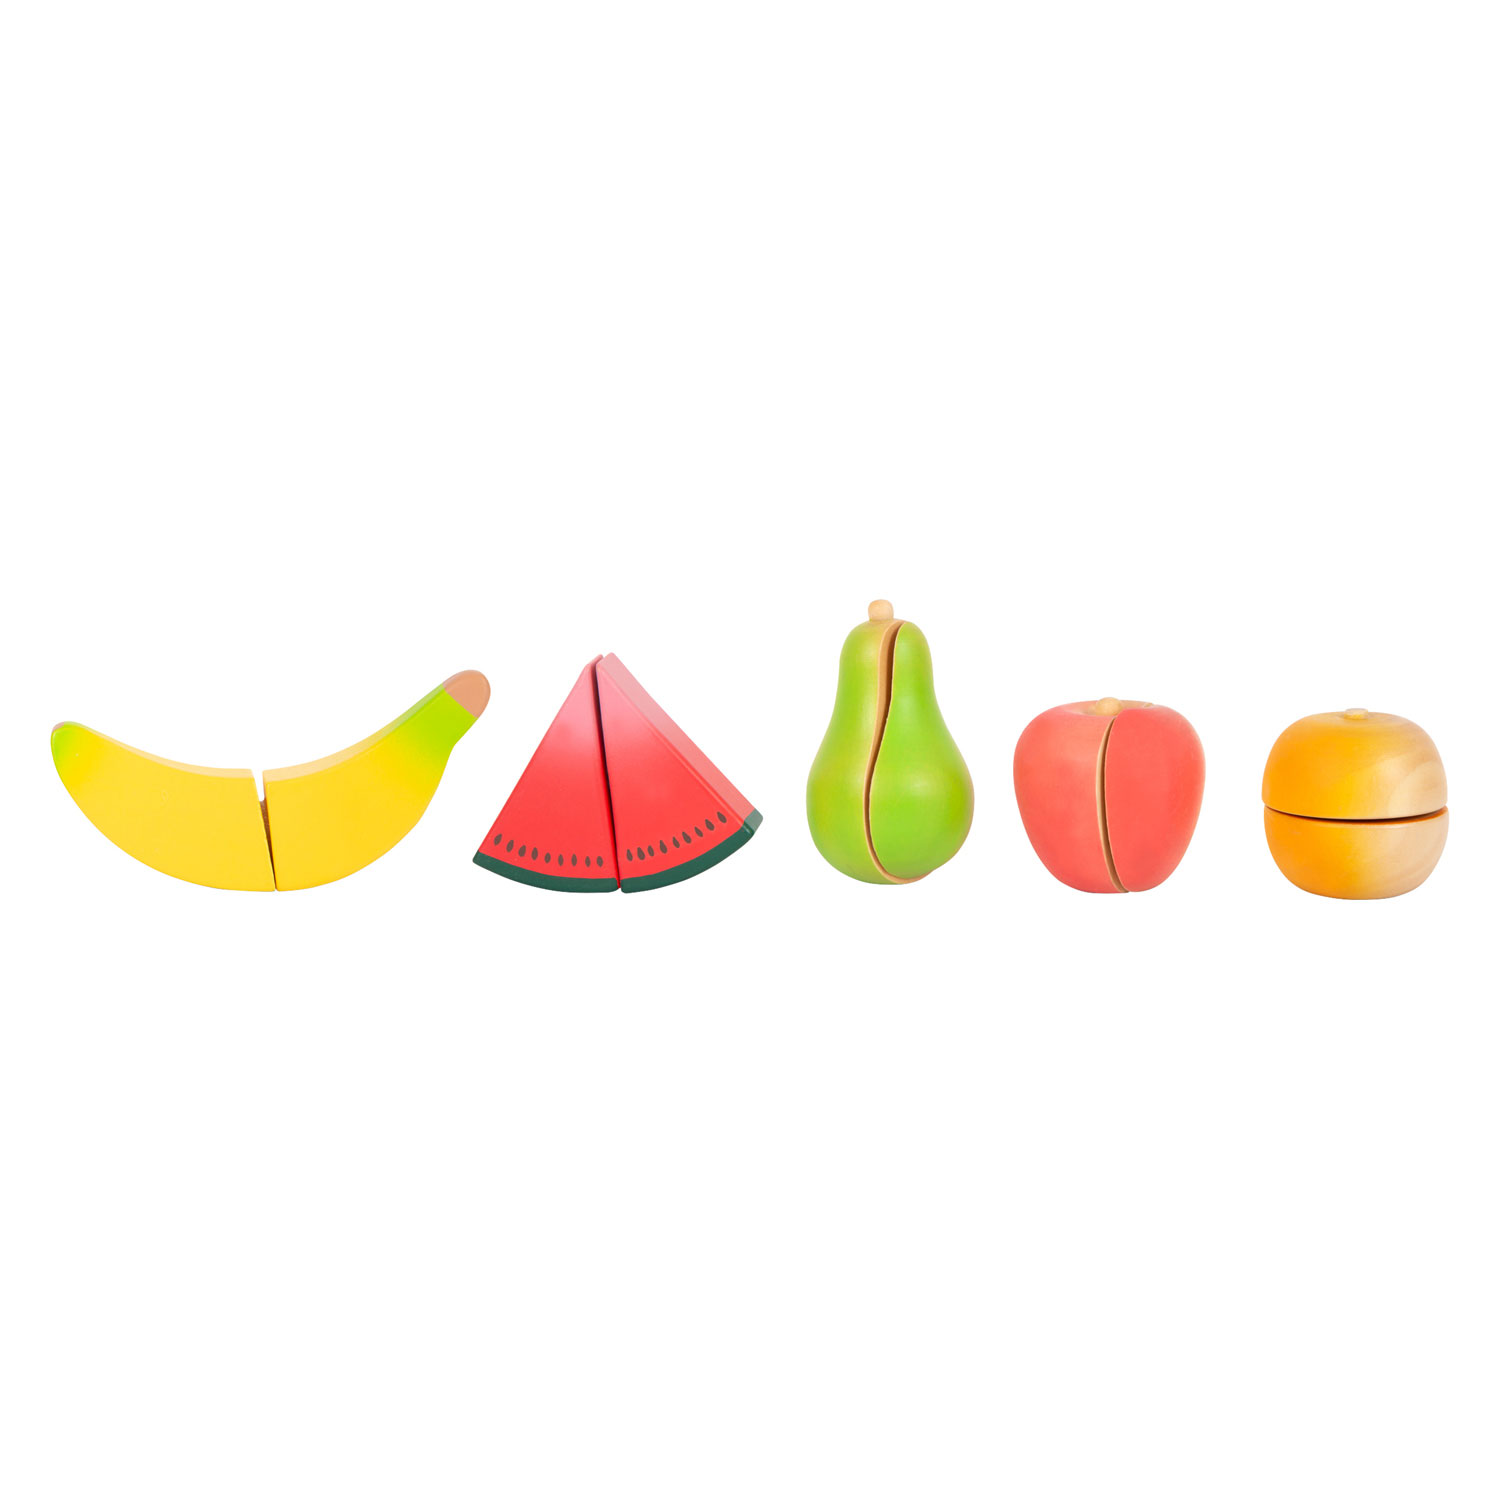 Small Foot - Cut and Play Food-Obst-Set aus Holz, 13dlg.